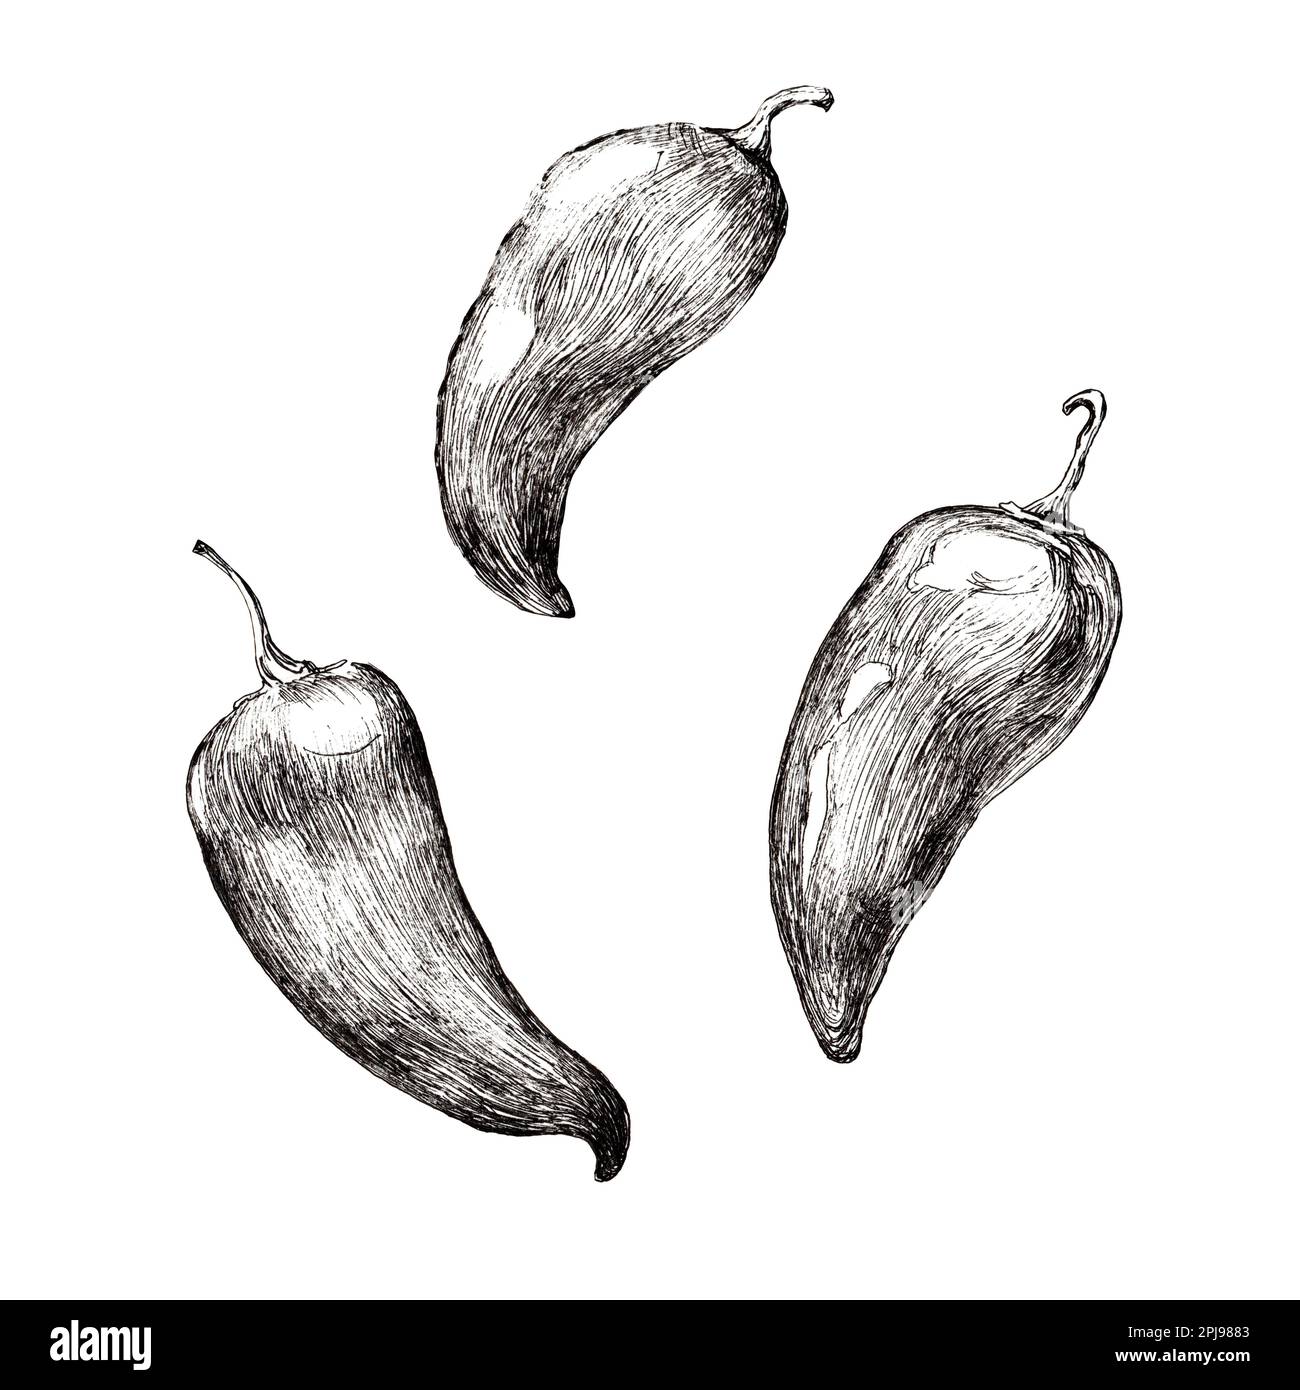 Graphic drawing of peppers on a white background. Black pen. Handwork ...